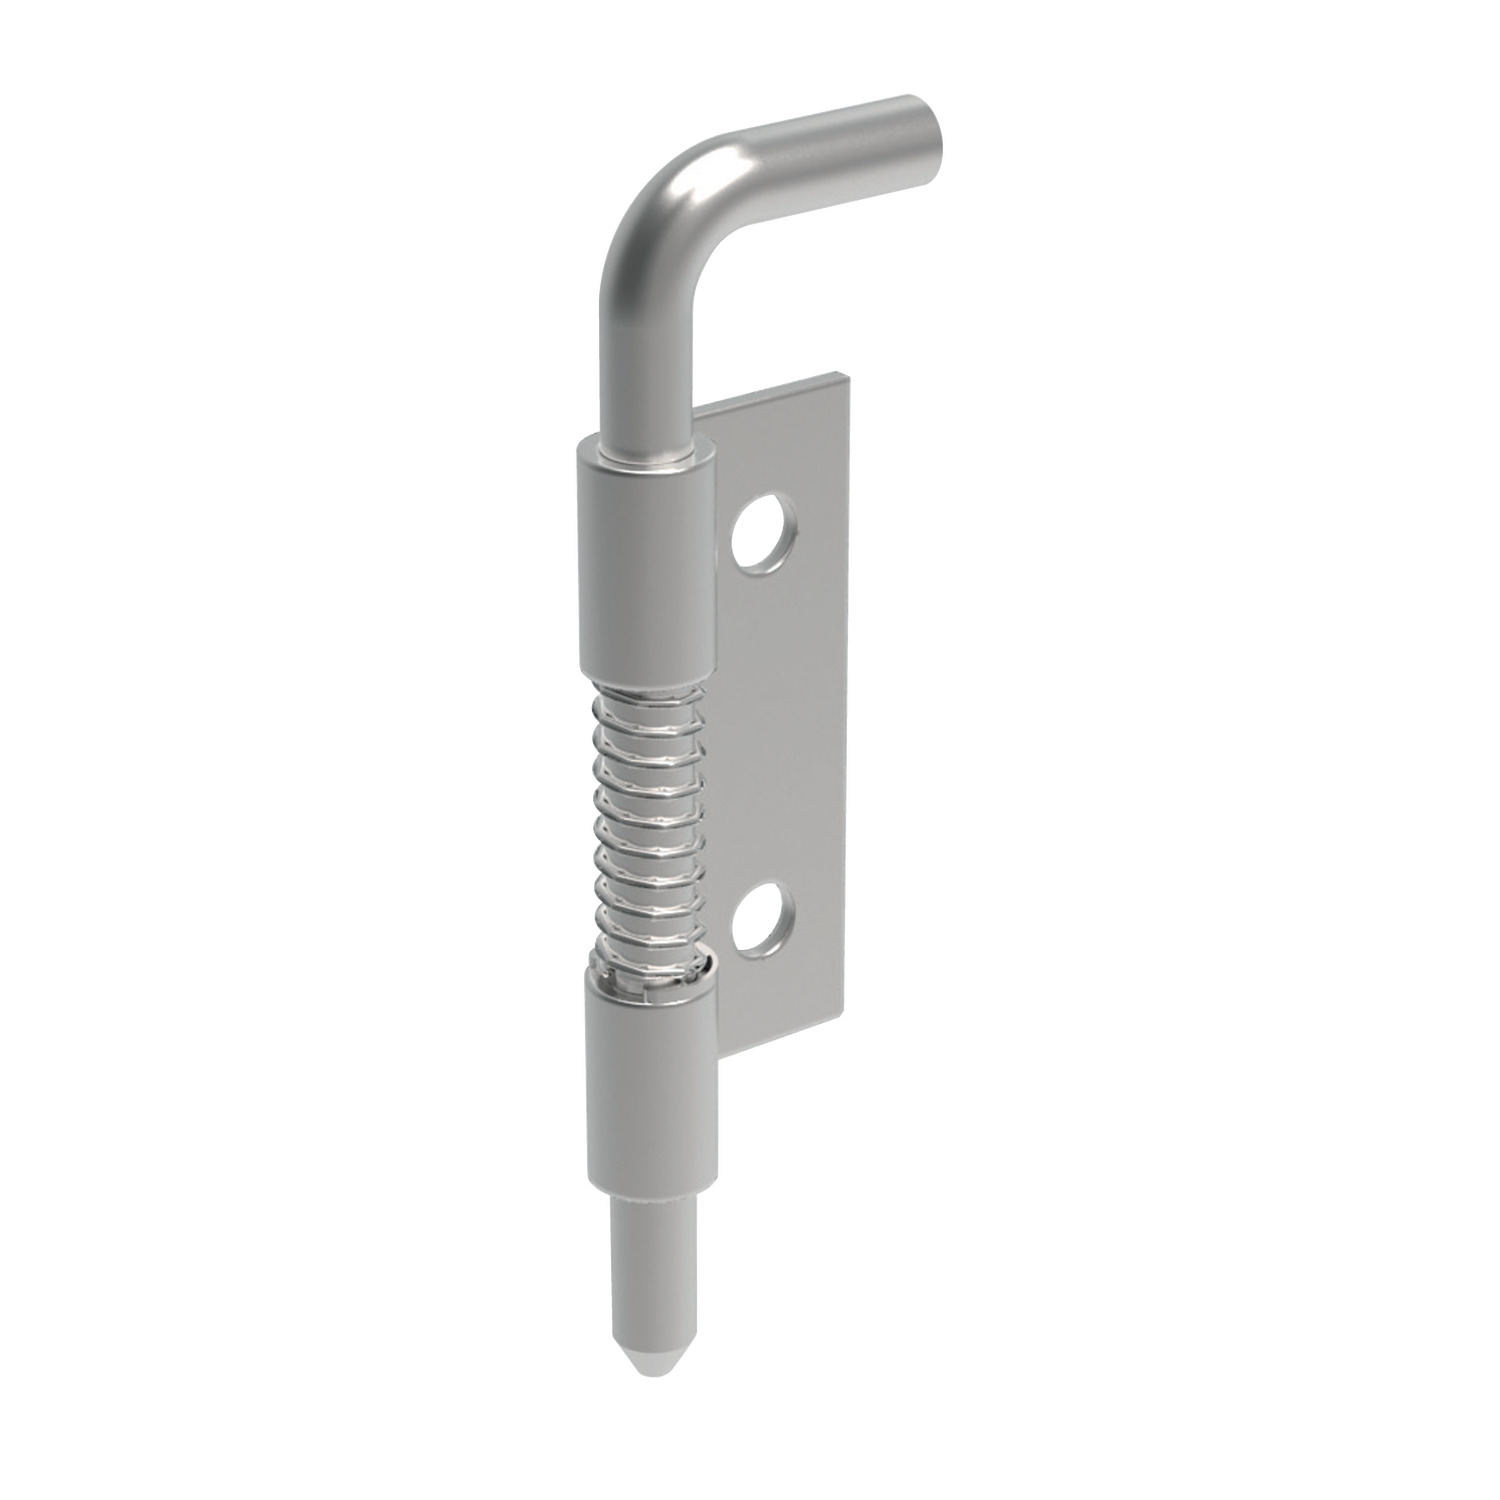 S2205.AW0132 End Mount Concealed Pivot Hinge Spring loaded - screw or weld-on mount - steel. Right Hand - M3. Supplied in multiples of 4